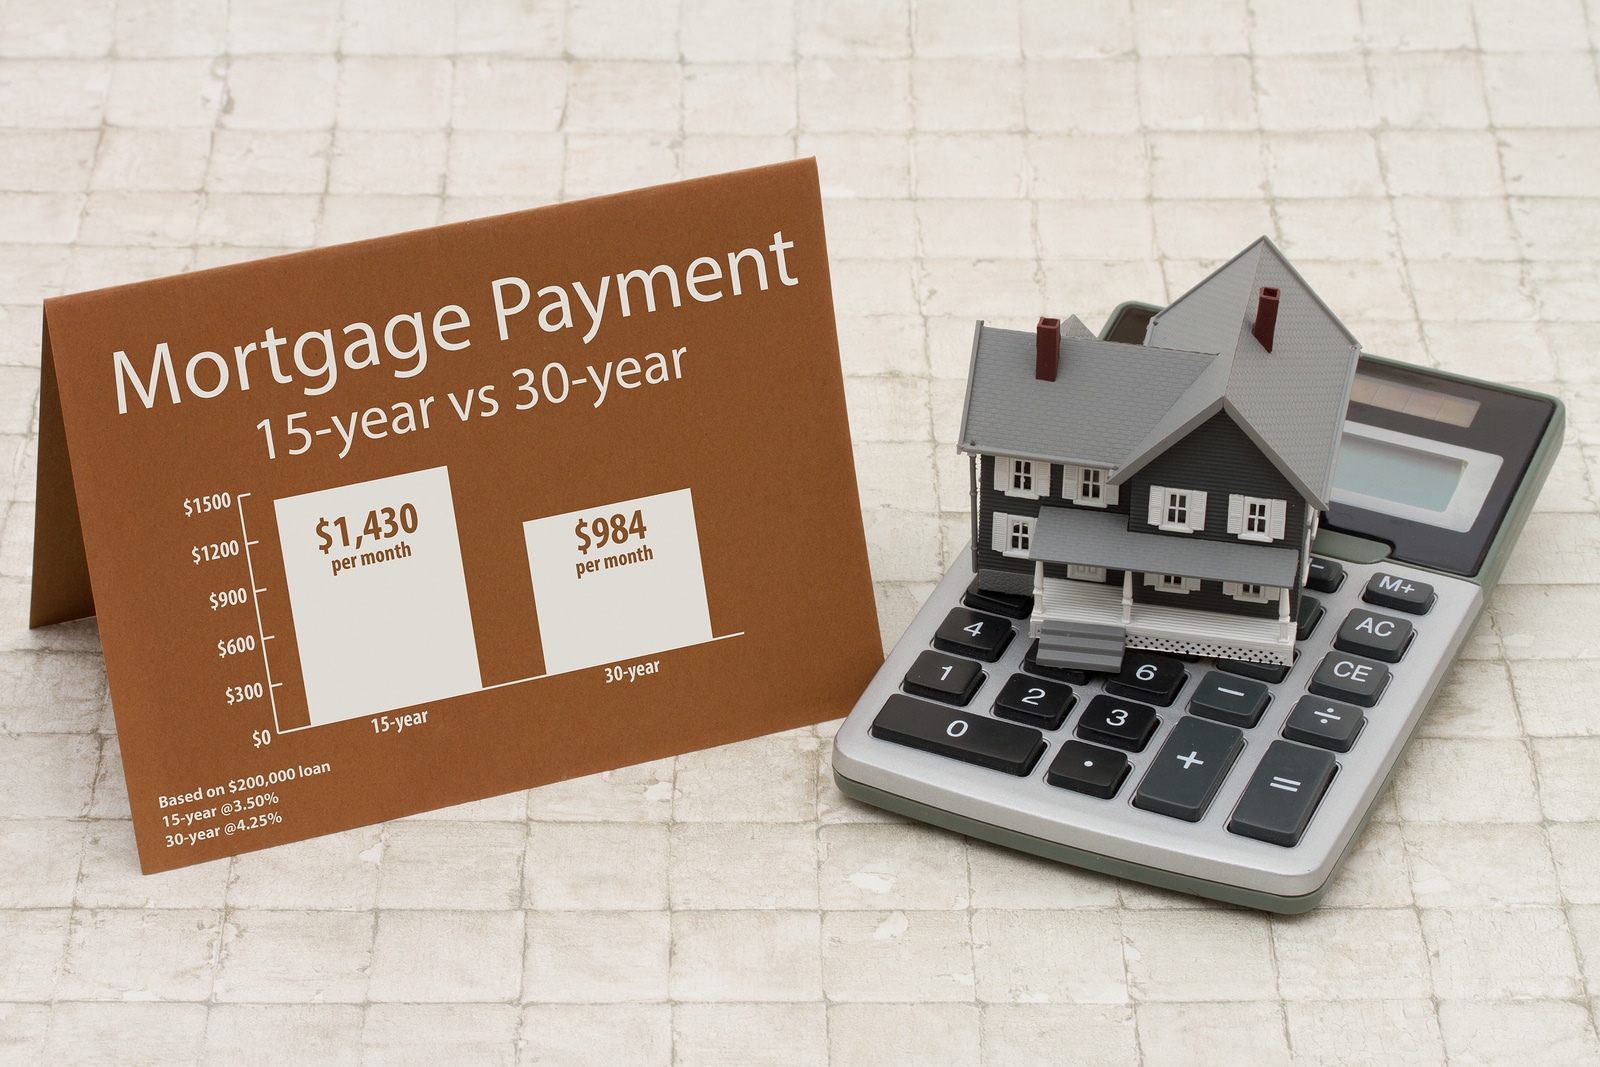 Learning about mortgage payments House on a calculator with a card and an infographic on the mortgage payments